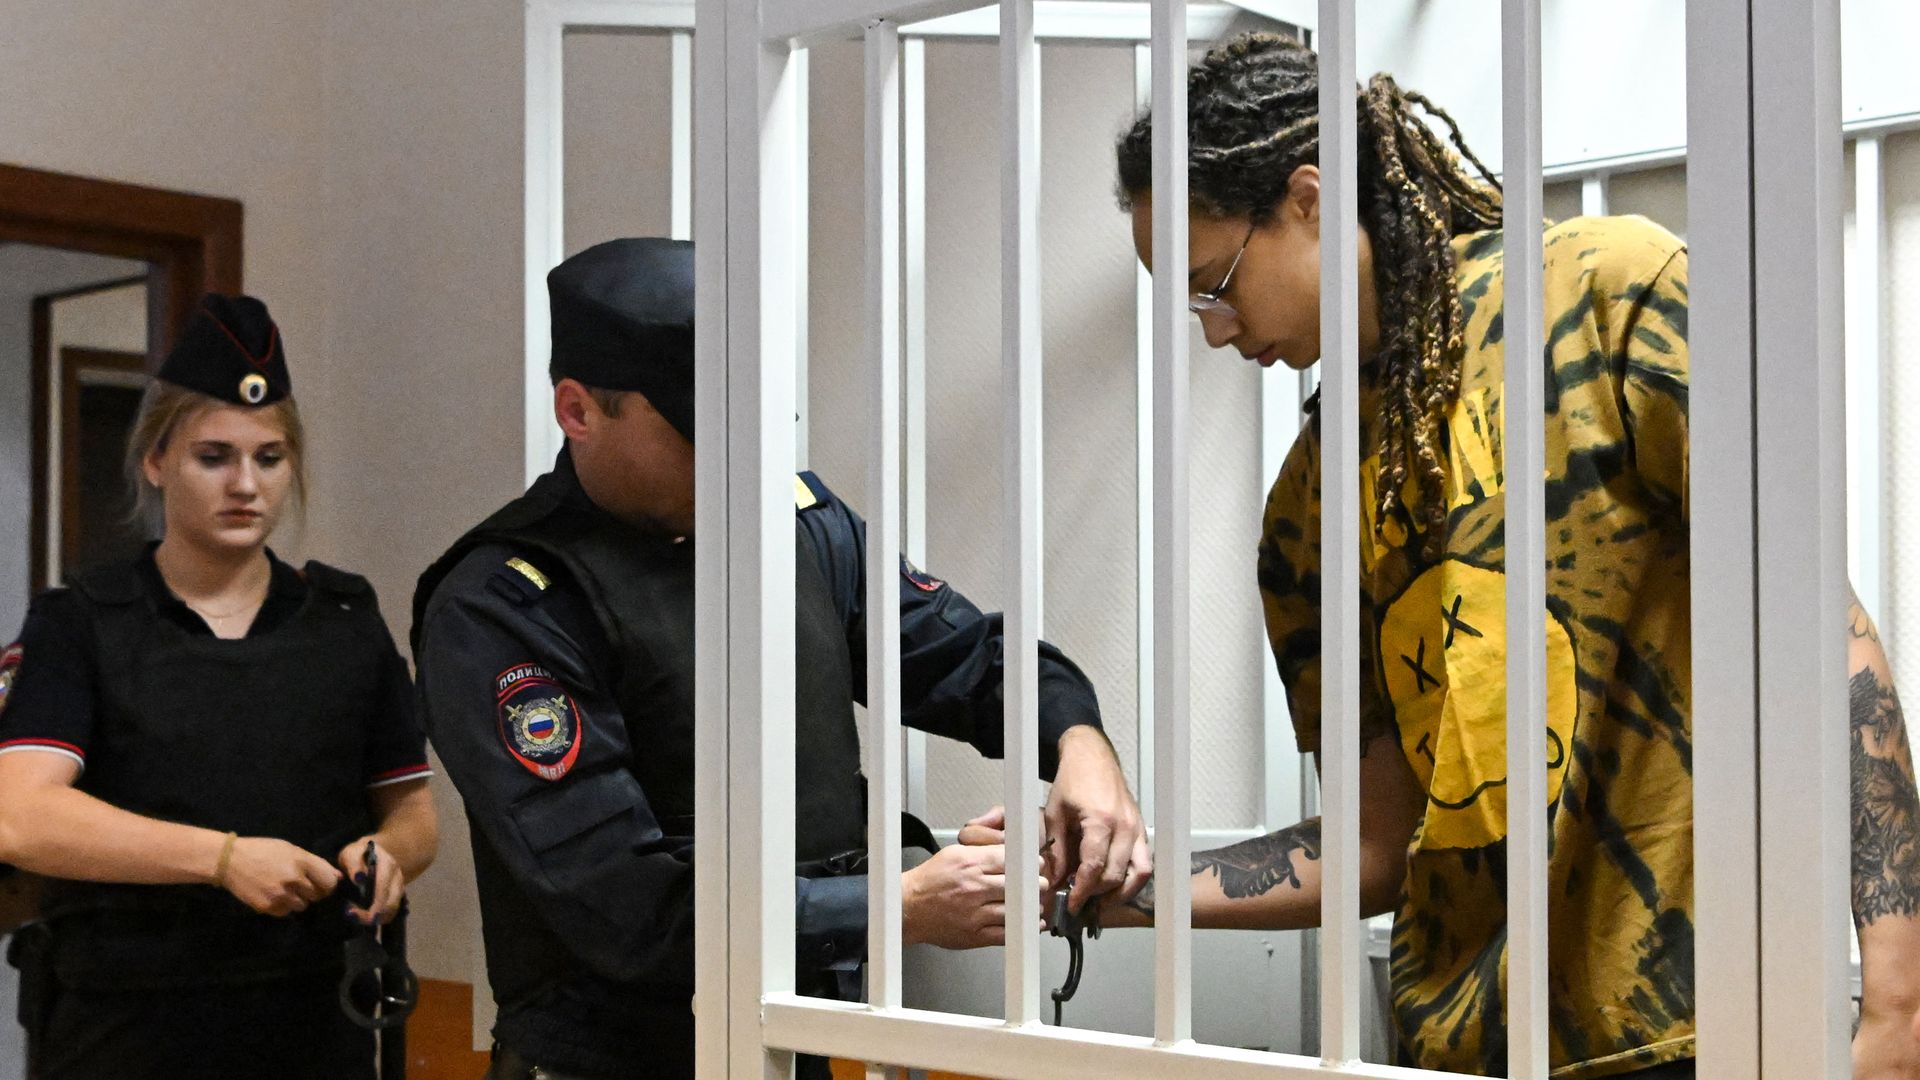 US WNBA basketball superstar Brittney Griner gets handcuffs taken off before a hearing at the Khimki Court in the town of Khimki outside Moscow on July 15, 2022.